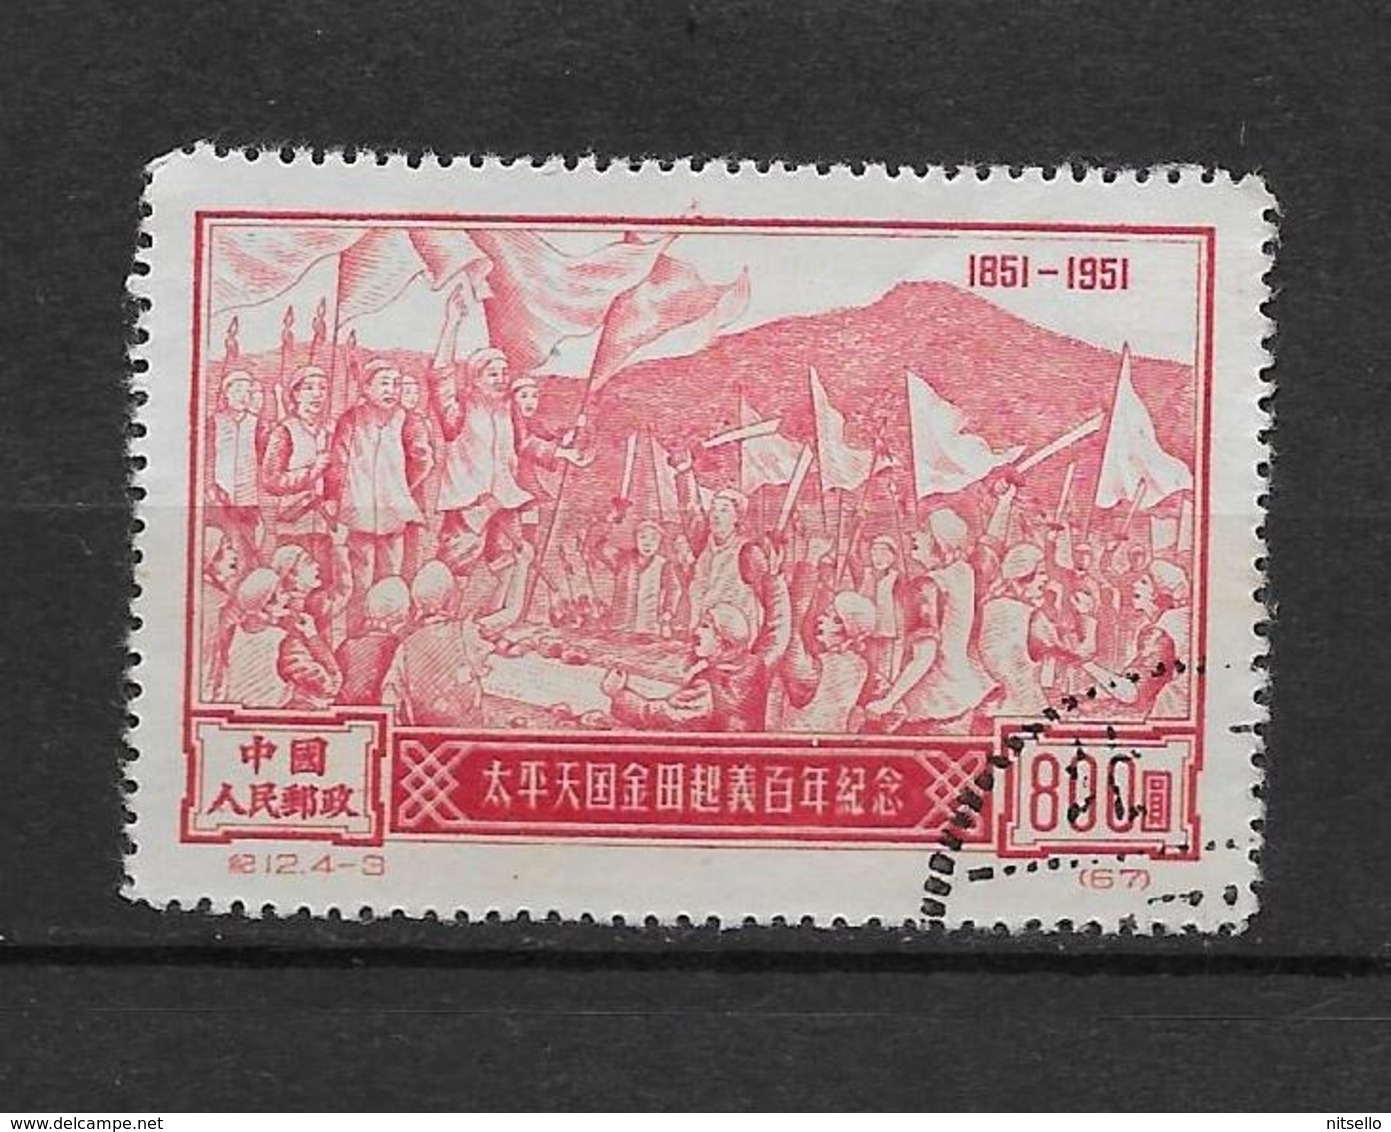 LOTE 1797   /// (C120) CHINA   YVERT Nº: 921 - Used Stamps